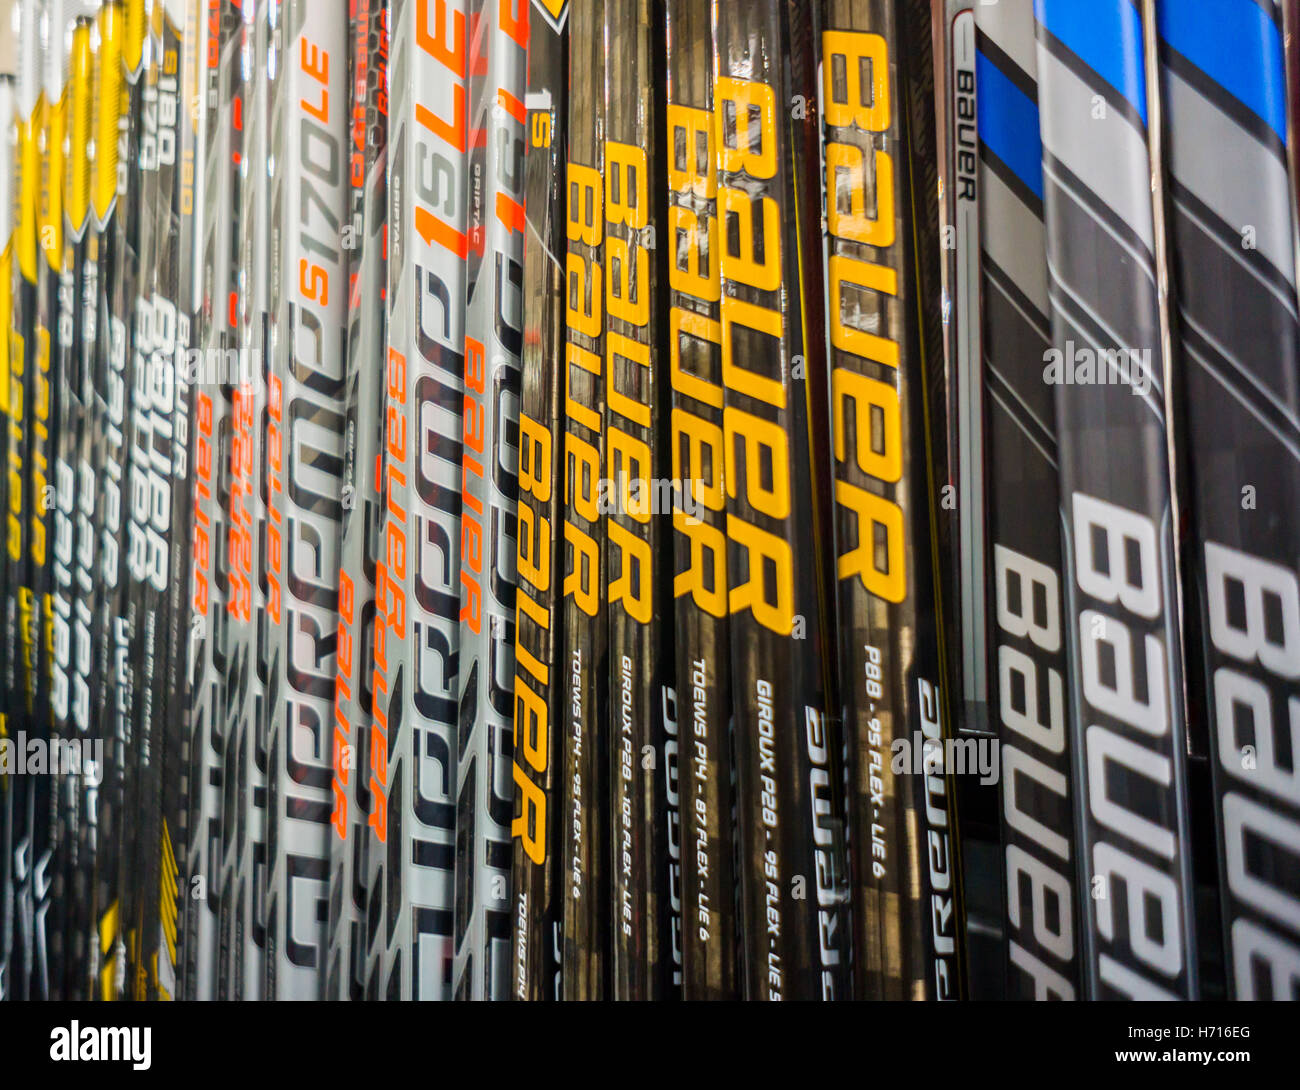 Bauer brand hockey sticks in a sporting goods store in New York on Monday,  October 31, 2016. Performance Sports Group, the owner of the Bauer ice  hockey brand and the Easton baseball